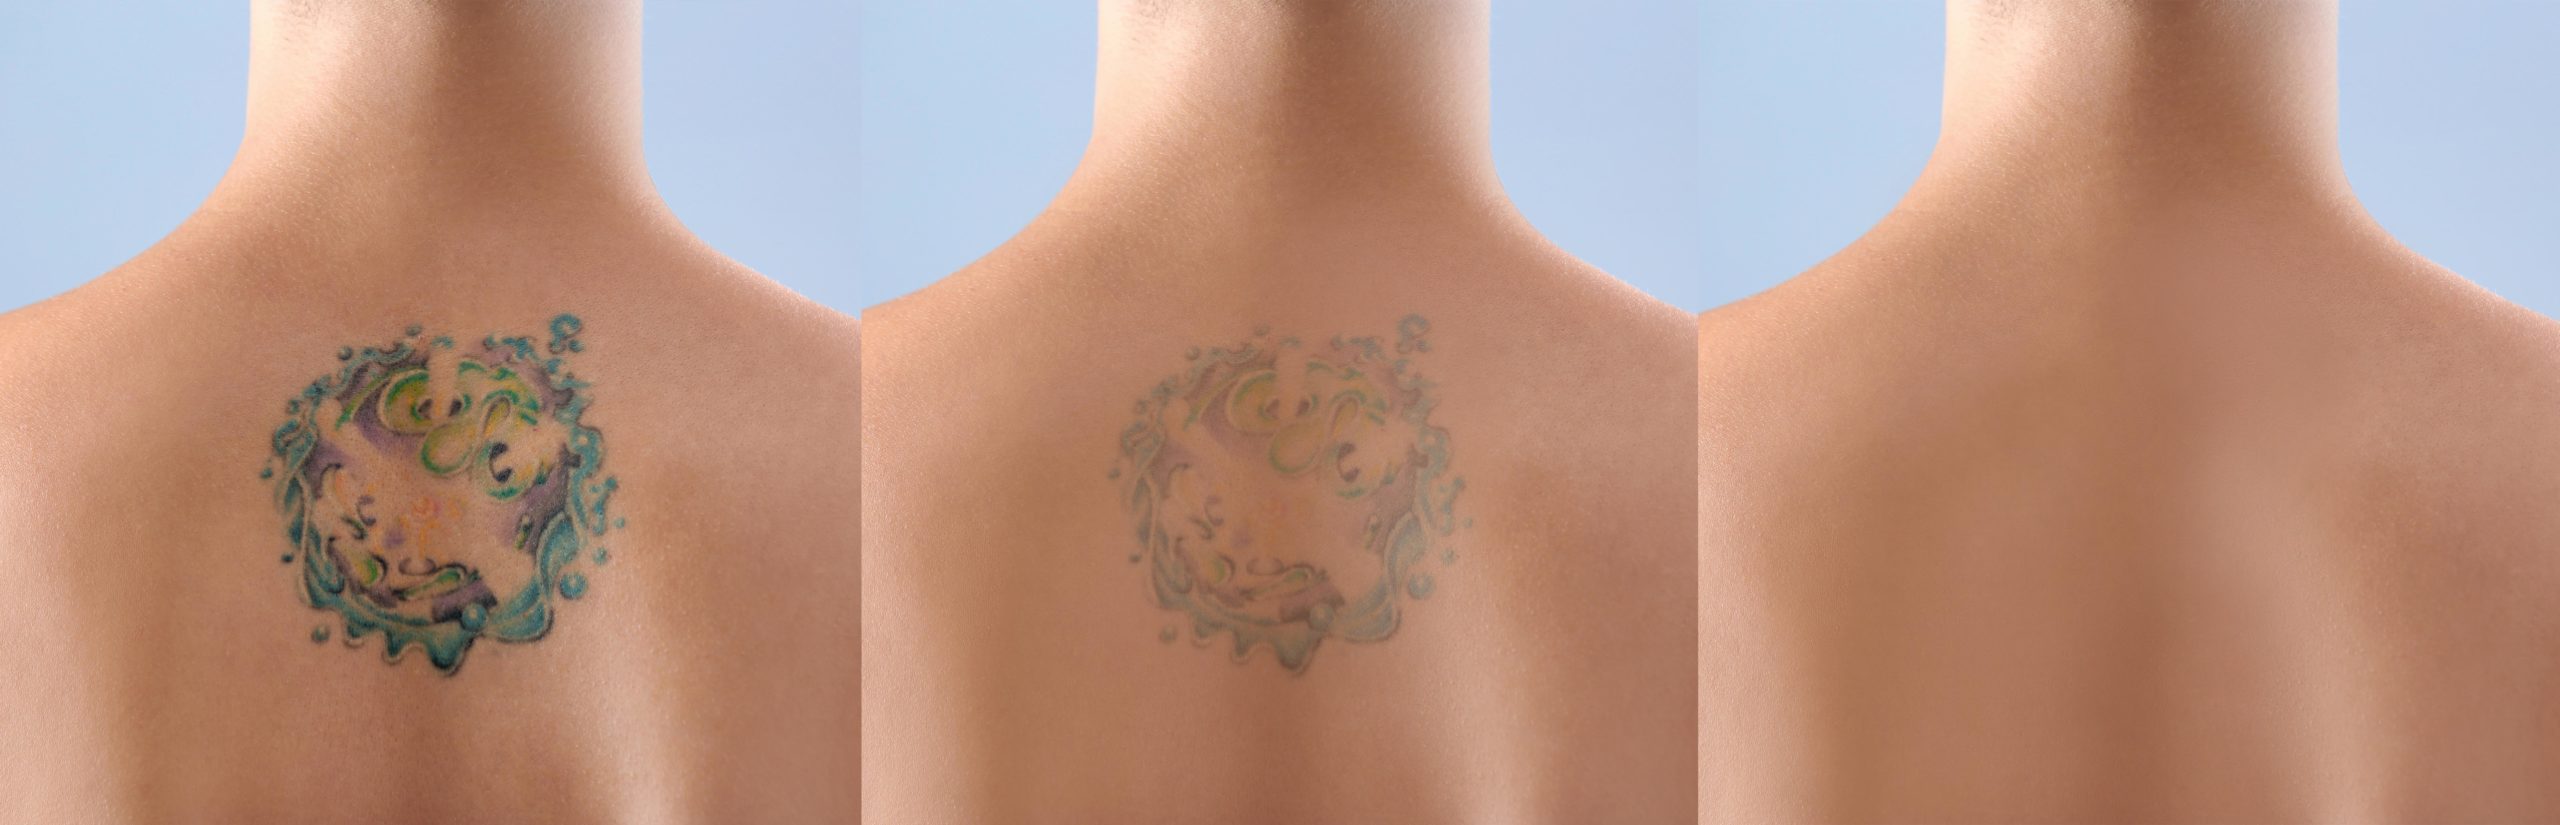 Tattoo Removal Before and After Photo